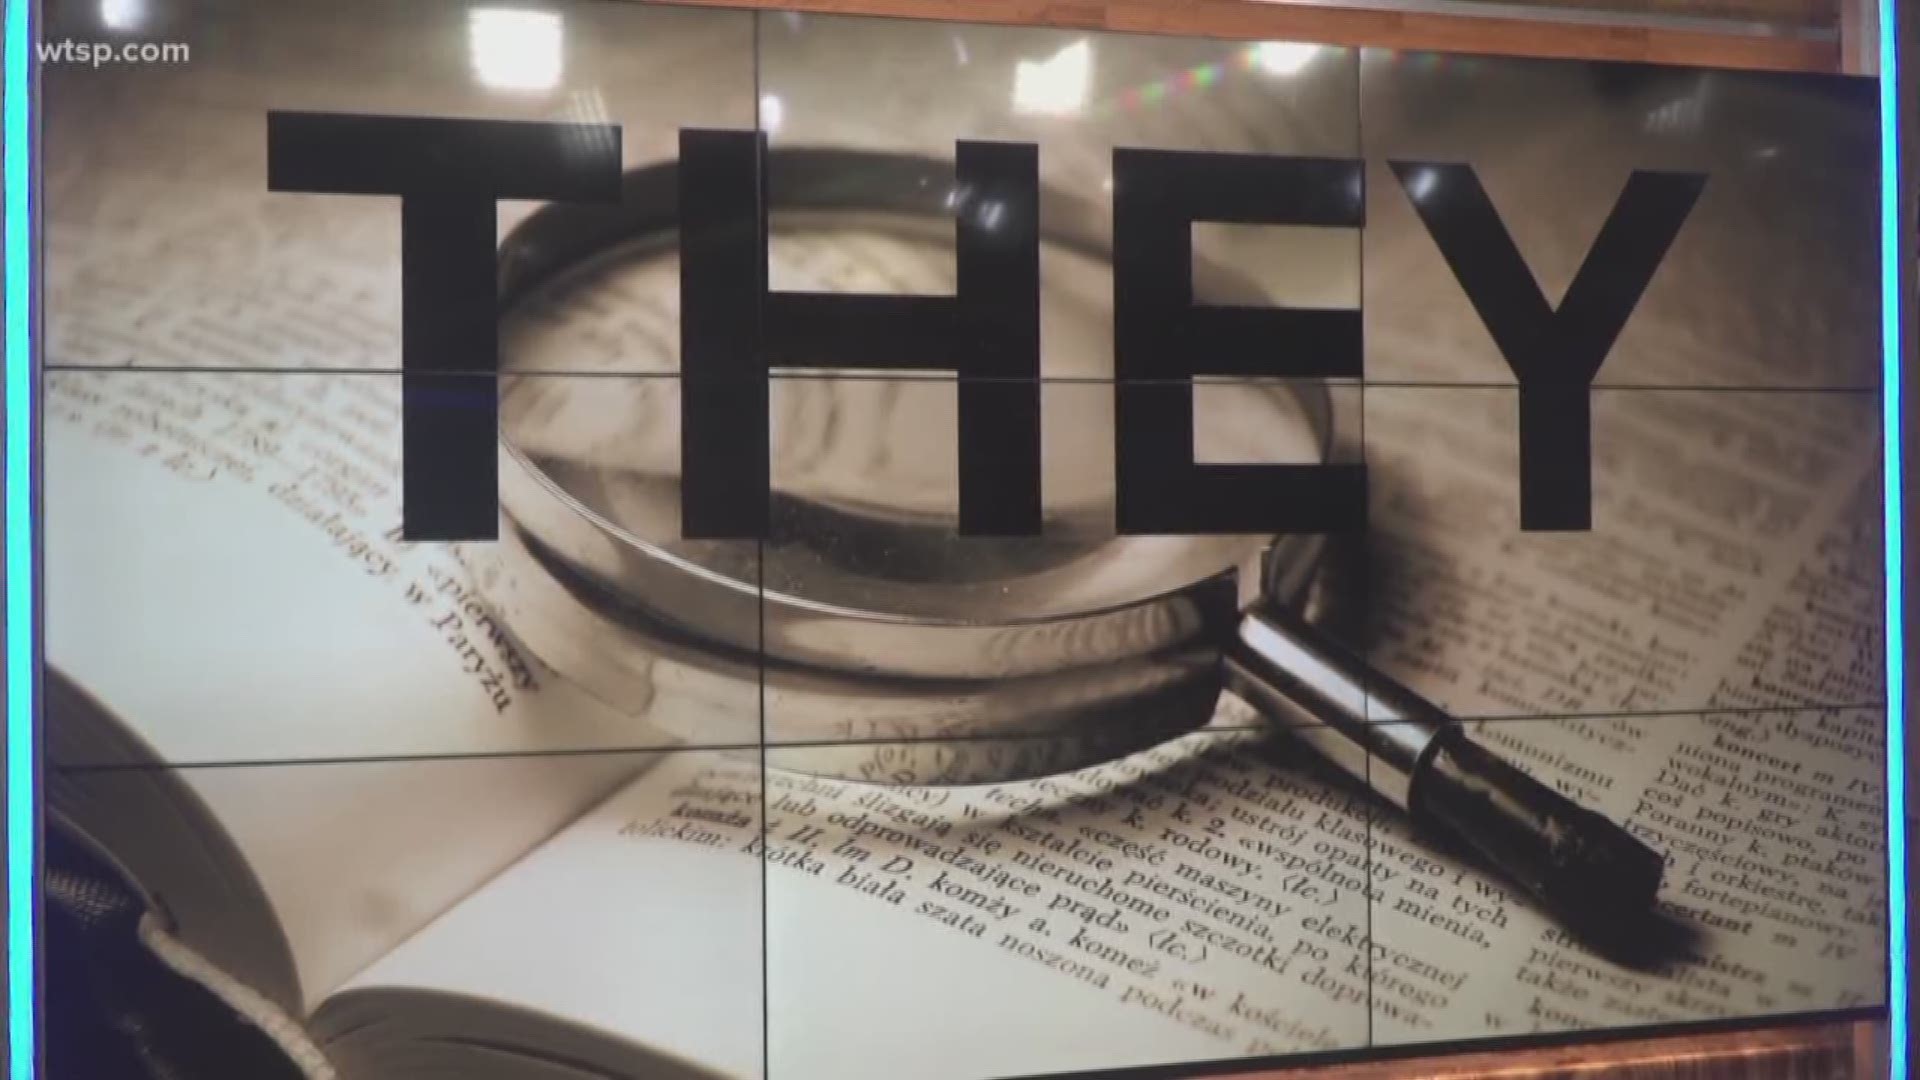 10News spoke with Merriam-Webster about the pronoun that's changing our culture.